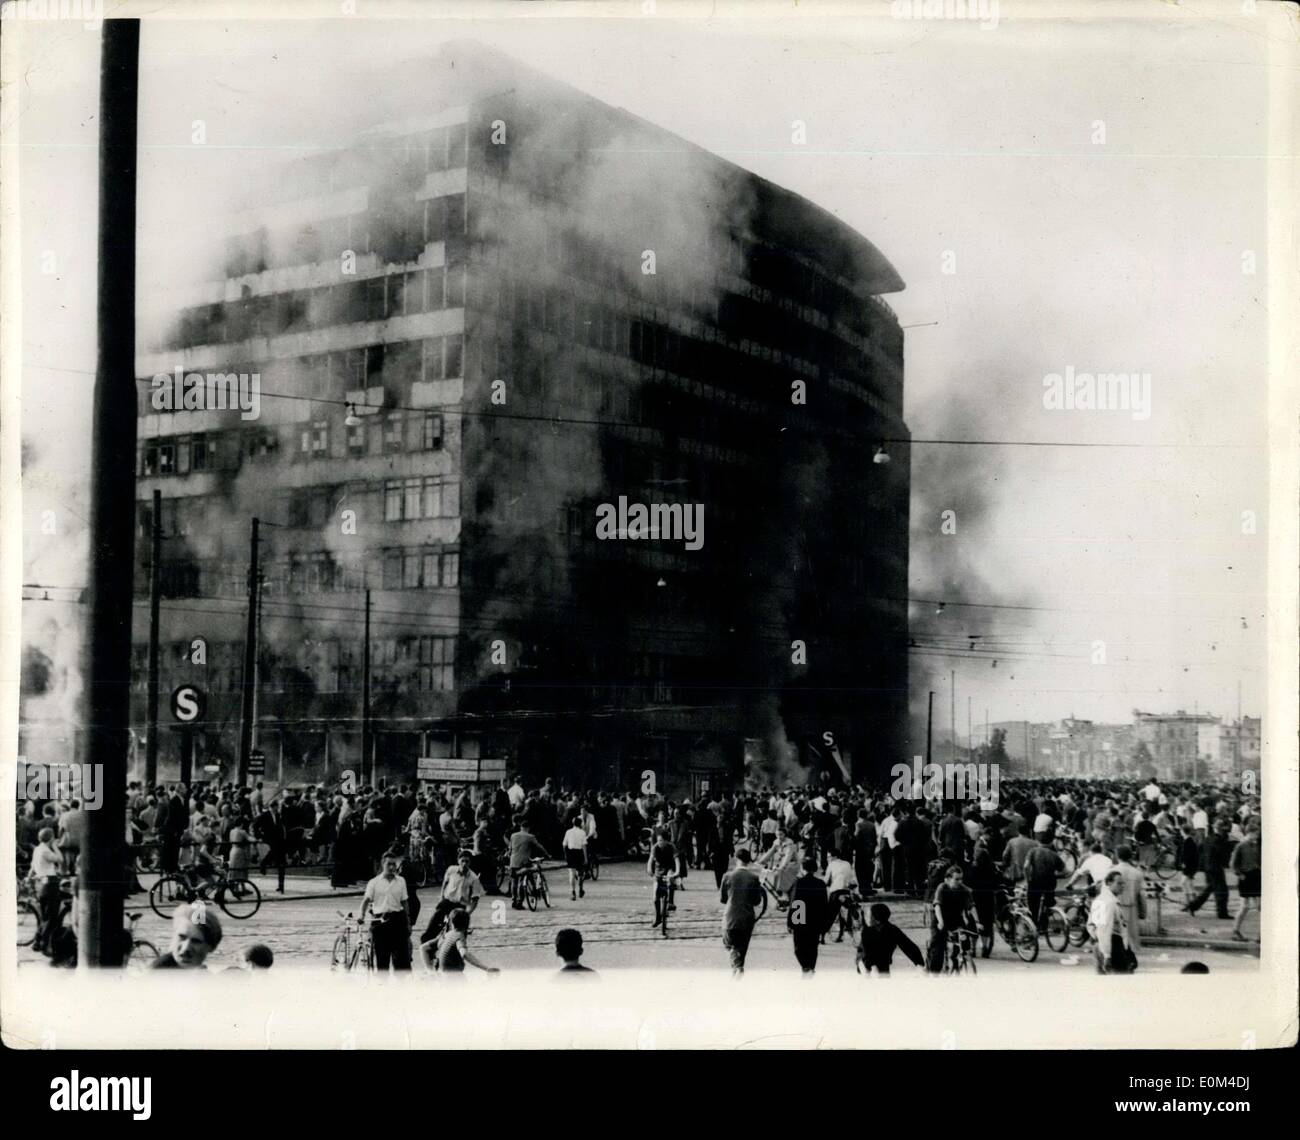 Jun. 19, 1953 - Riots and Demonstrations in East Berlin. Columbus house burns. Photo shows The scene in East Berlin as the Columbus House, in the Potsdammer Platz burns - during the demonstrations by 100,000 East Berlin workers. The Soviet Authorities decided mortal low and brought troops and tanks into the city. Stock Photo